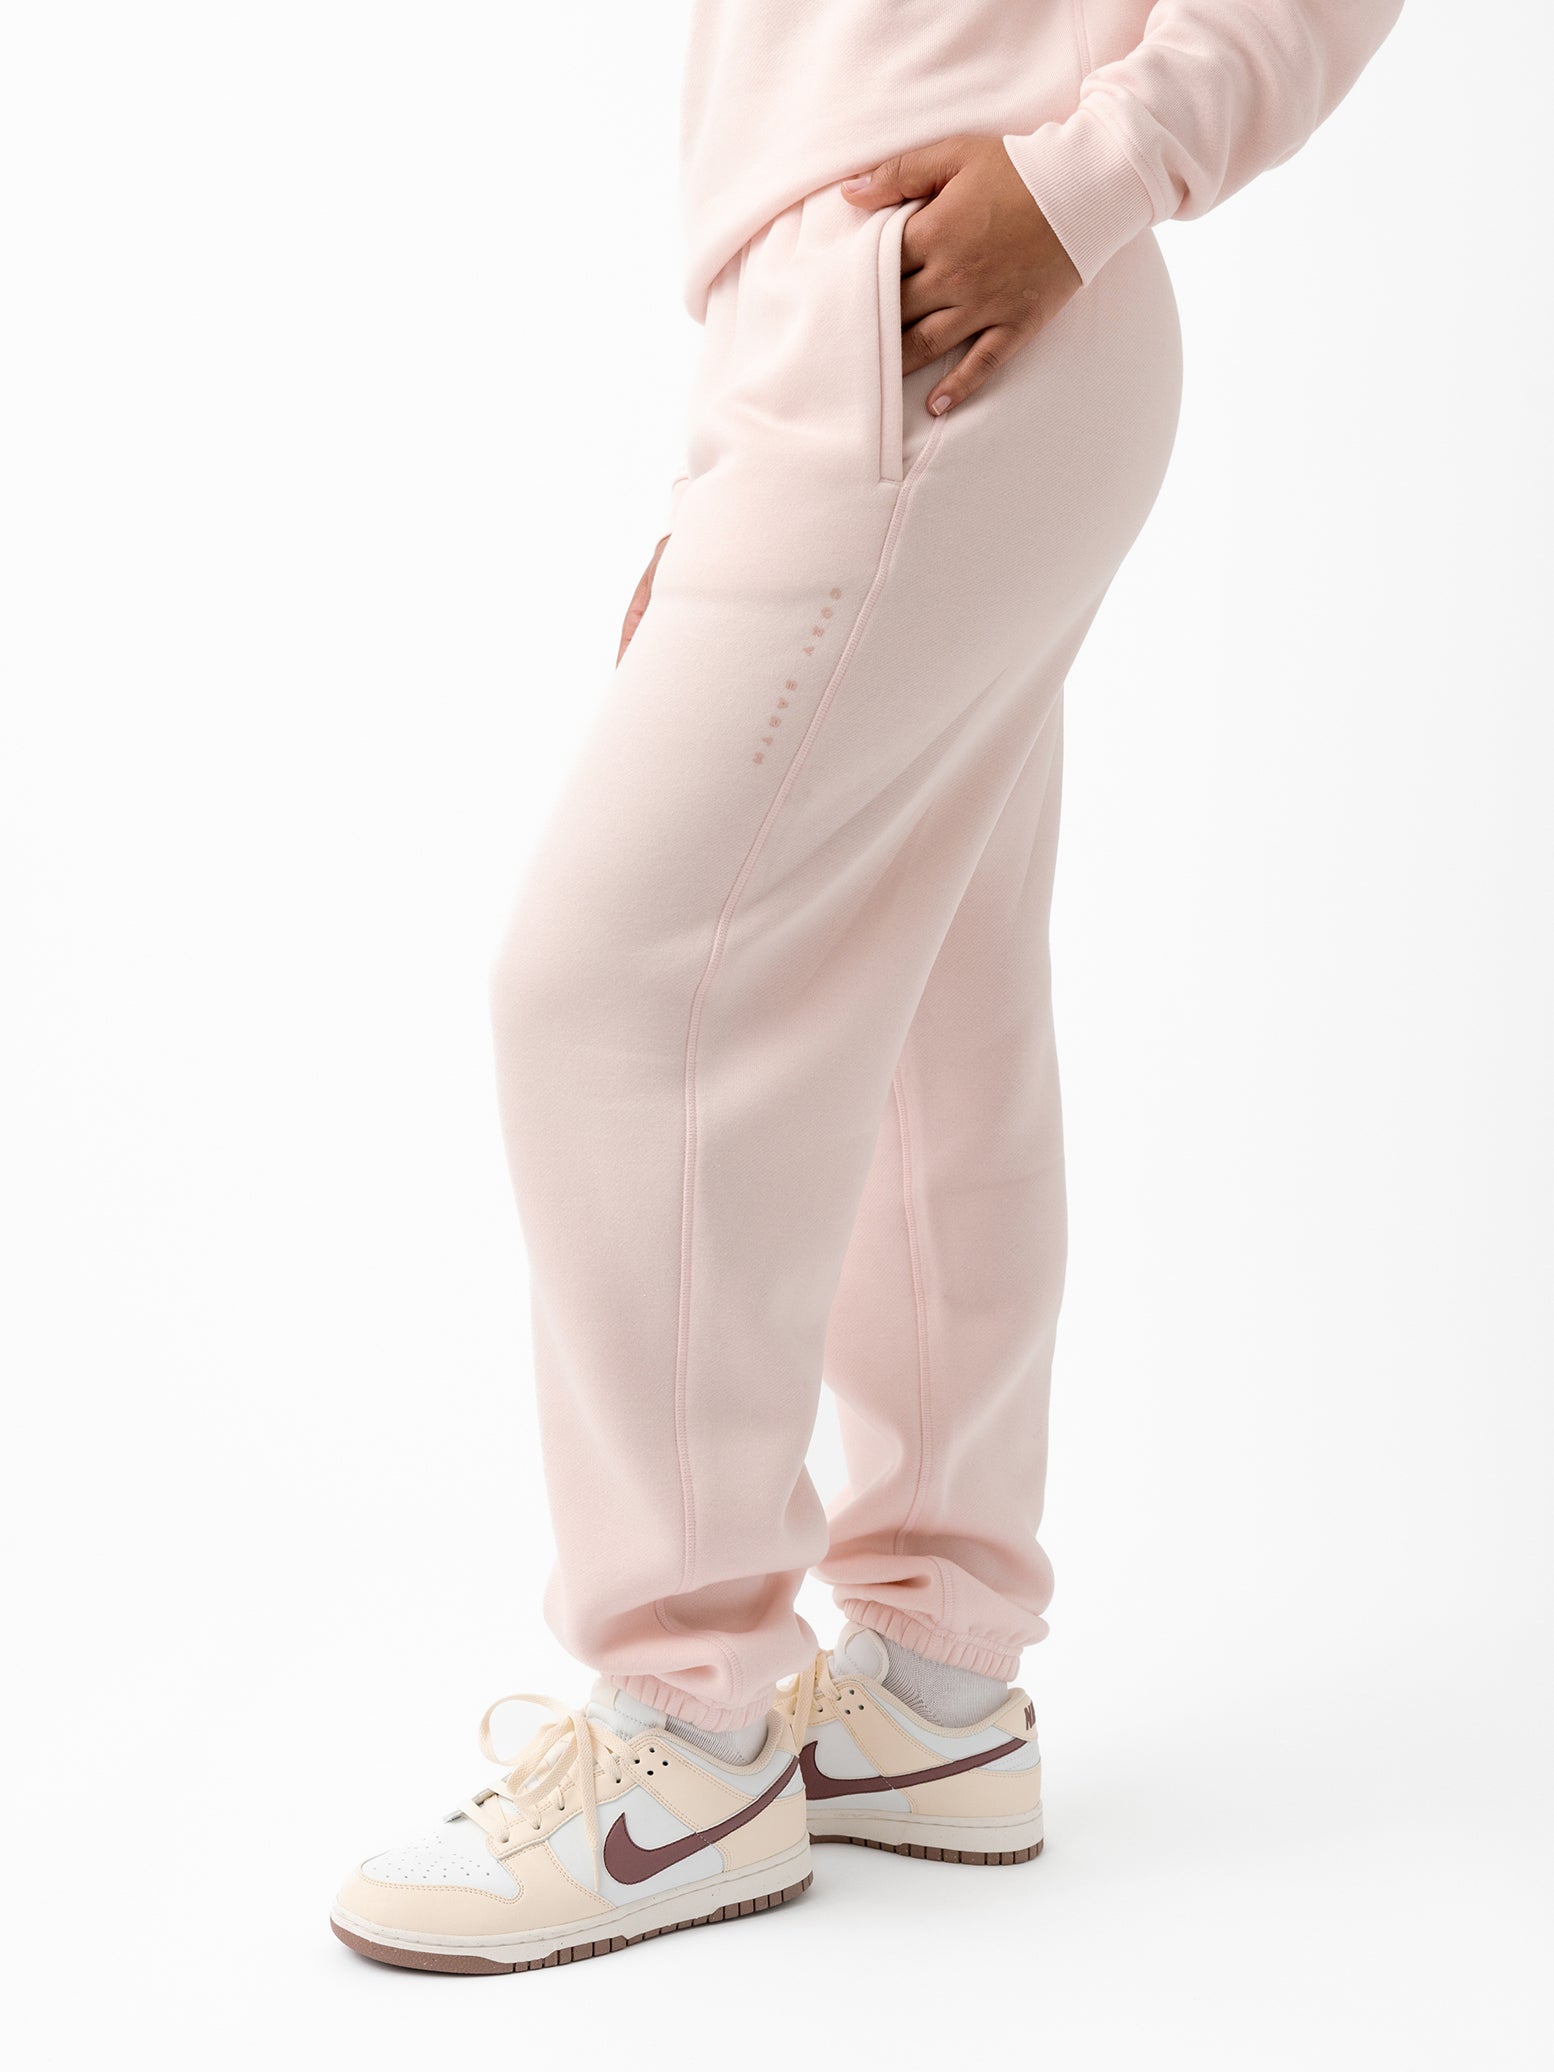 Peony CityScape Joggers. The Joggers are being worn by a female model. The photo is taken from the waist down with the models hands by the pocket of the joggers. The back ground is white. 